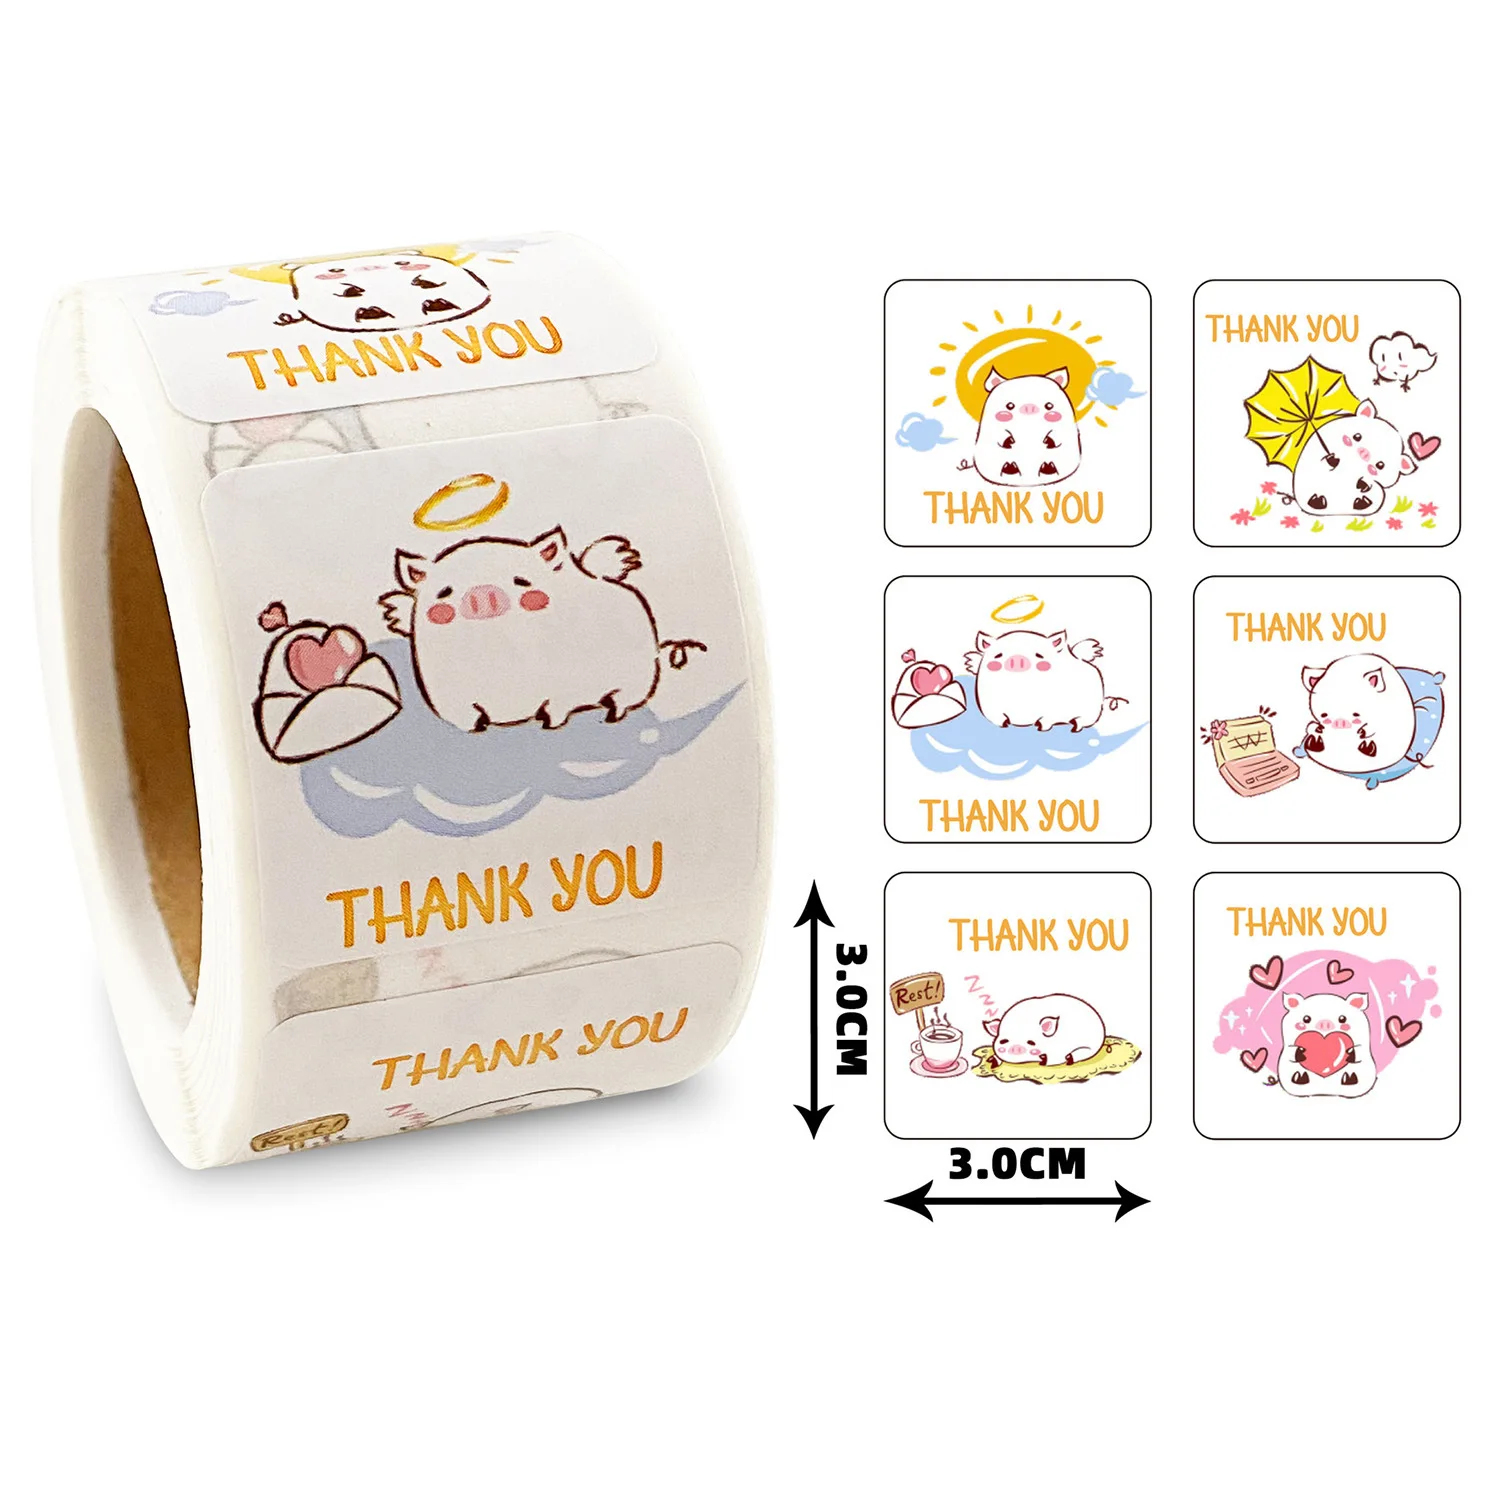 300pcs Square Cartoon Thank You Stickers 3*3cm Animal Sealing Labels for Small Business Packaging Gift Decoration Greeting Cards